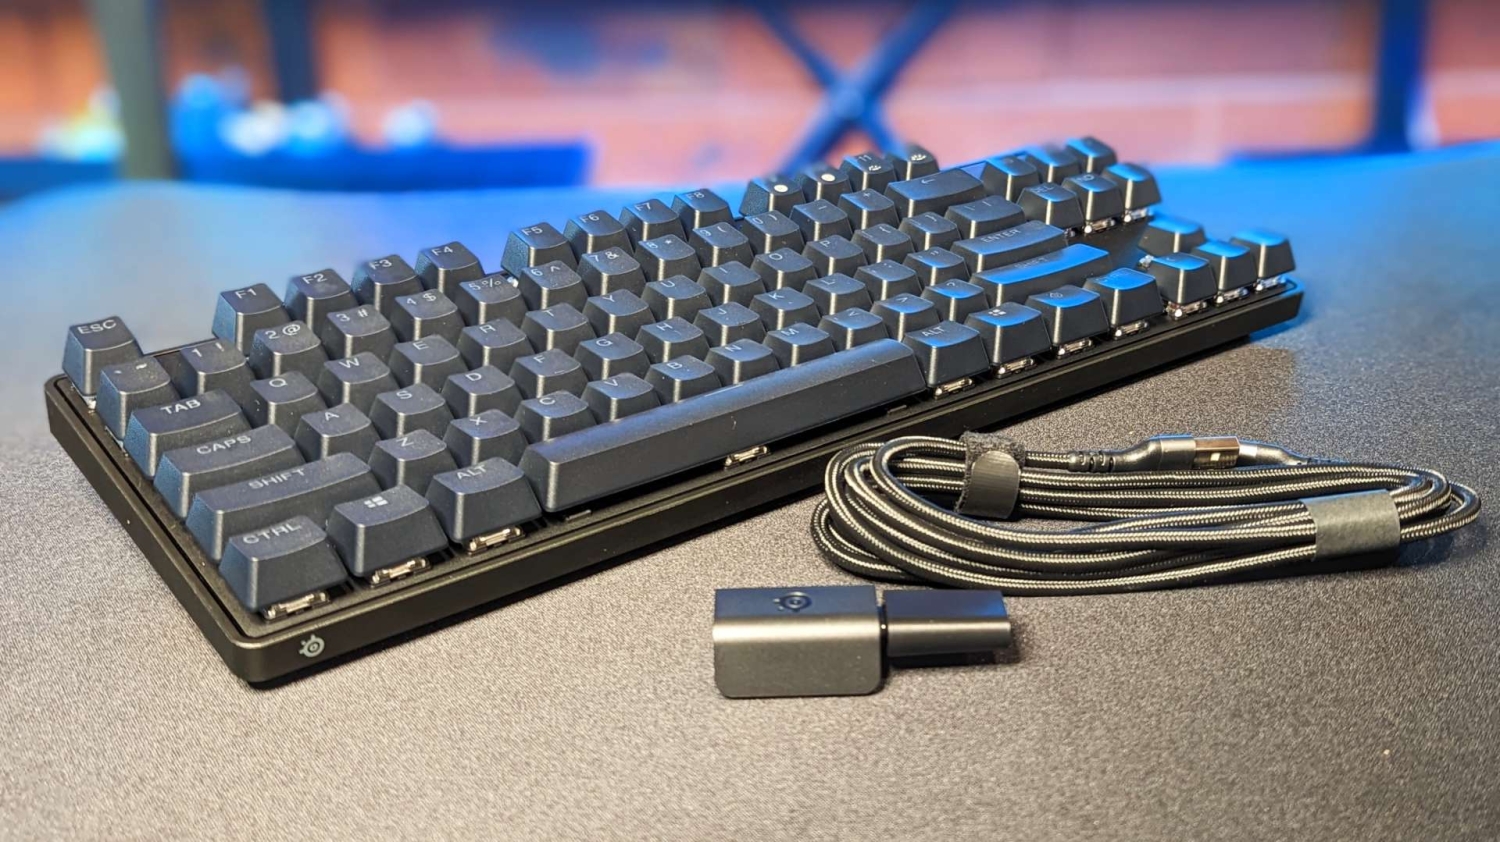 SteelSeries Apex Pro TKL Wireless keyboard review: An expensive let-down